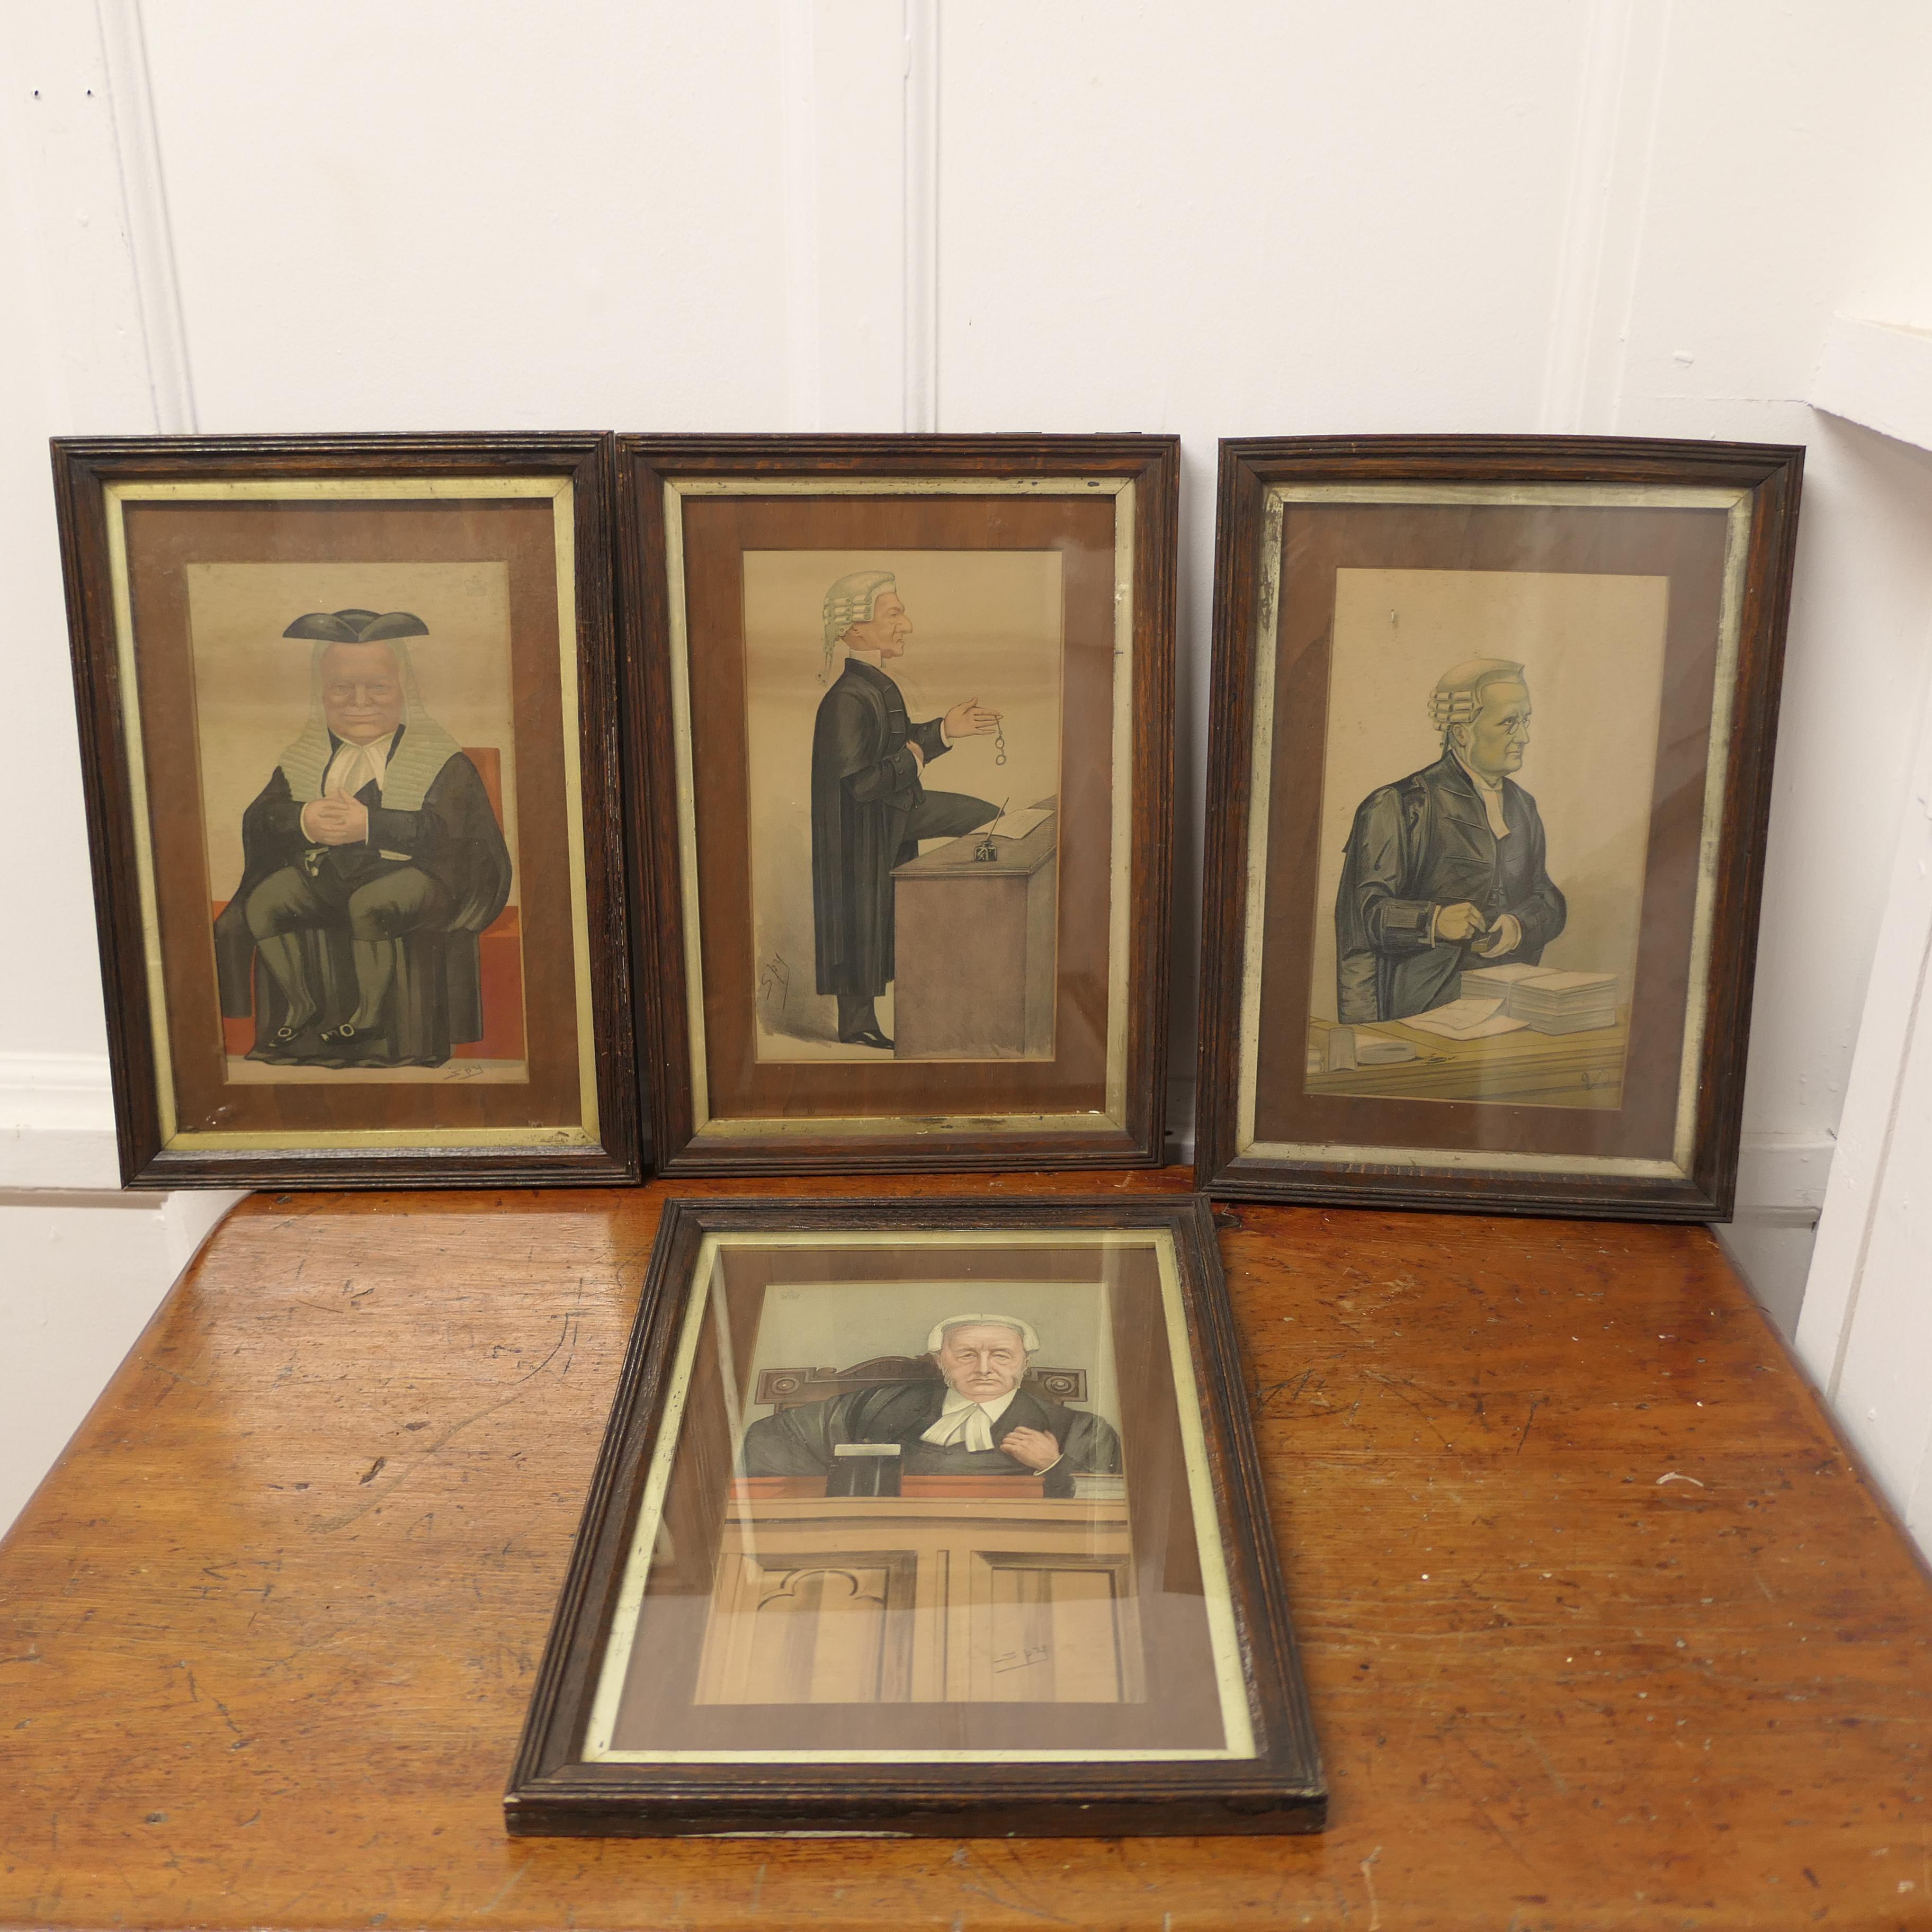 4 Vanity Fair “Spy” Prints  

A good collection of coloured prints dating from 1896 to 1904, mounted and in glazed frames, all men from the legal profession
A good collection to bring a little satirical humour on to your wall
The prints are 18”x